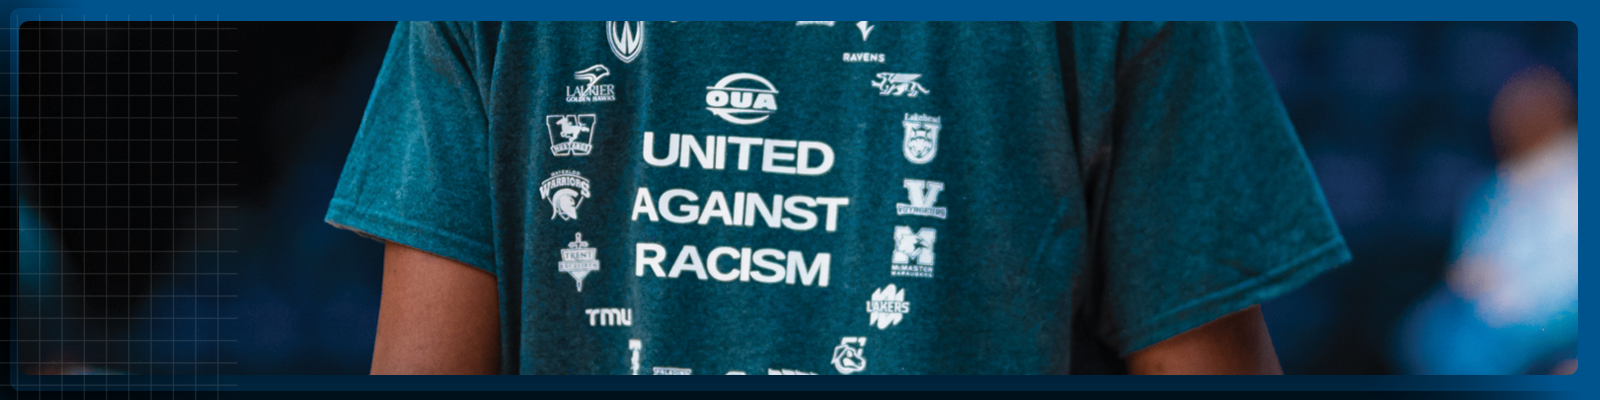 Graphic showcasing back of student-athlete wearing the OUA United Against Racism t-shirt